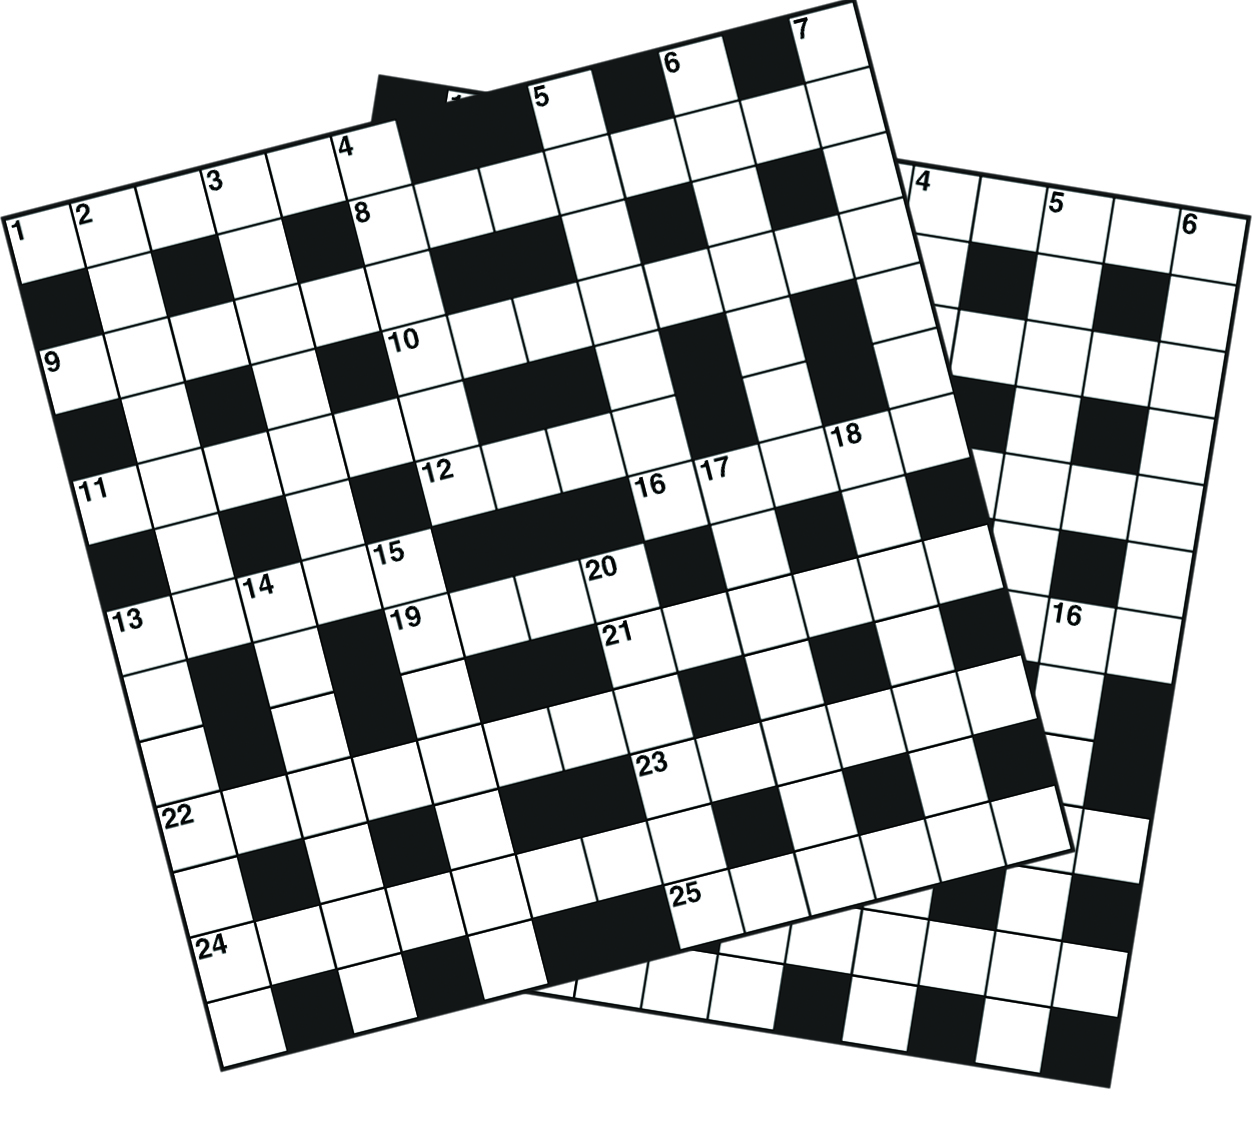 Image 1 for 12 CRYPTIC 307 CROSSWORDS BOOKLET 07